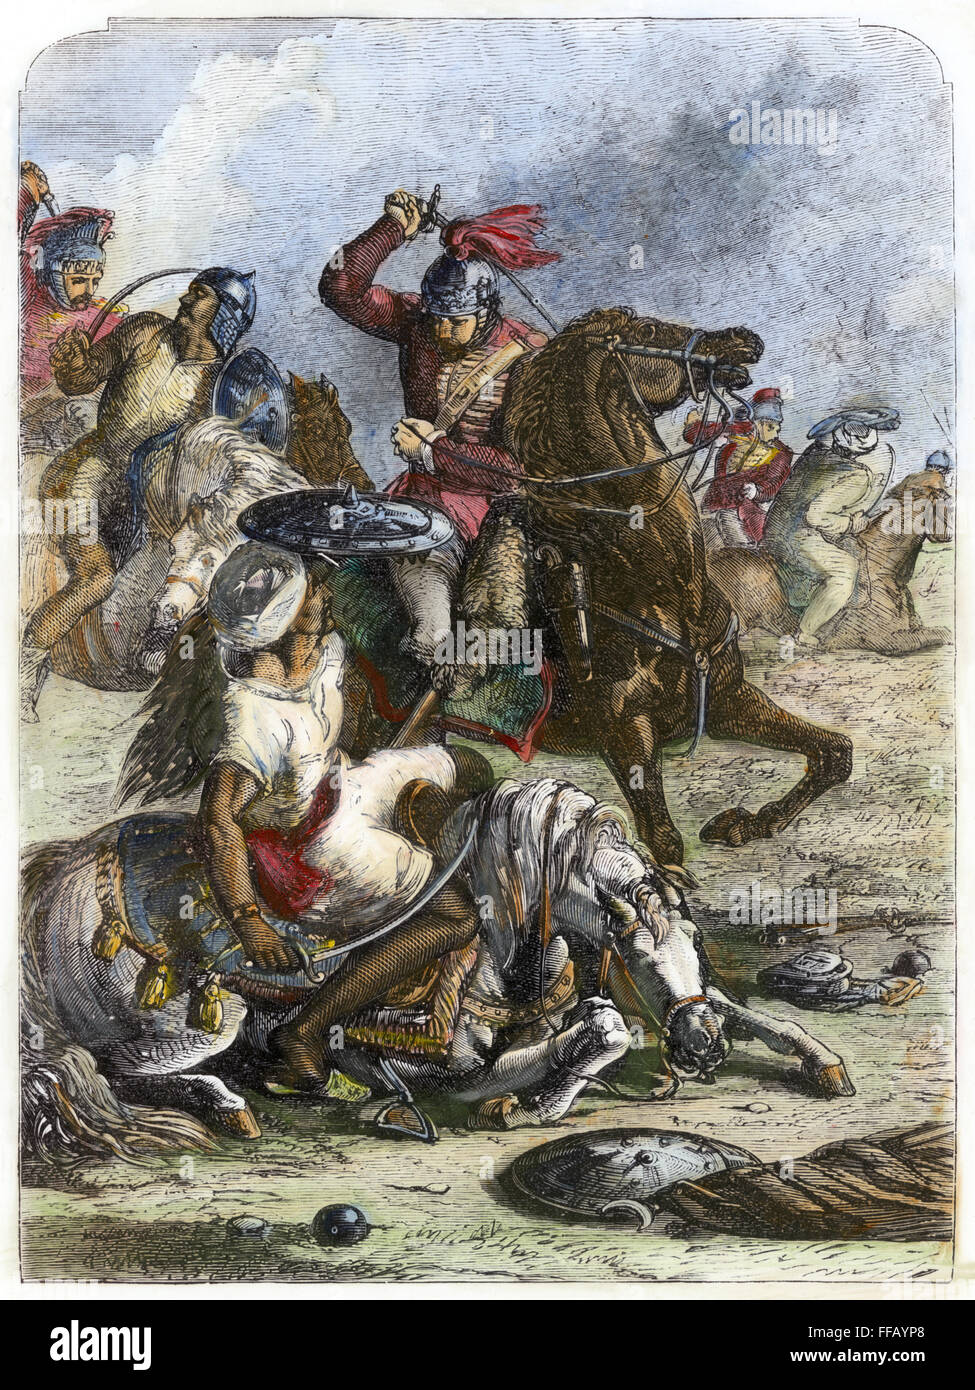 BATTLE OF ASSAYE, 1803. /nThe victory of British and Sepoy forces under General Arthur Wellesley (the future Duke of Wellington) at the village of Assaye, India, during the Second Maratha War, 23 September 1803. Wood engraving, 19th century. Stock Photo